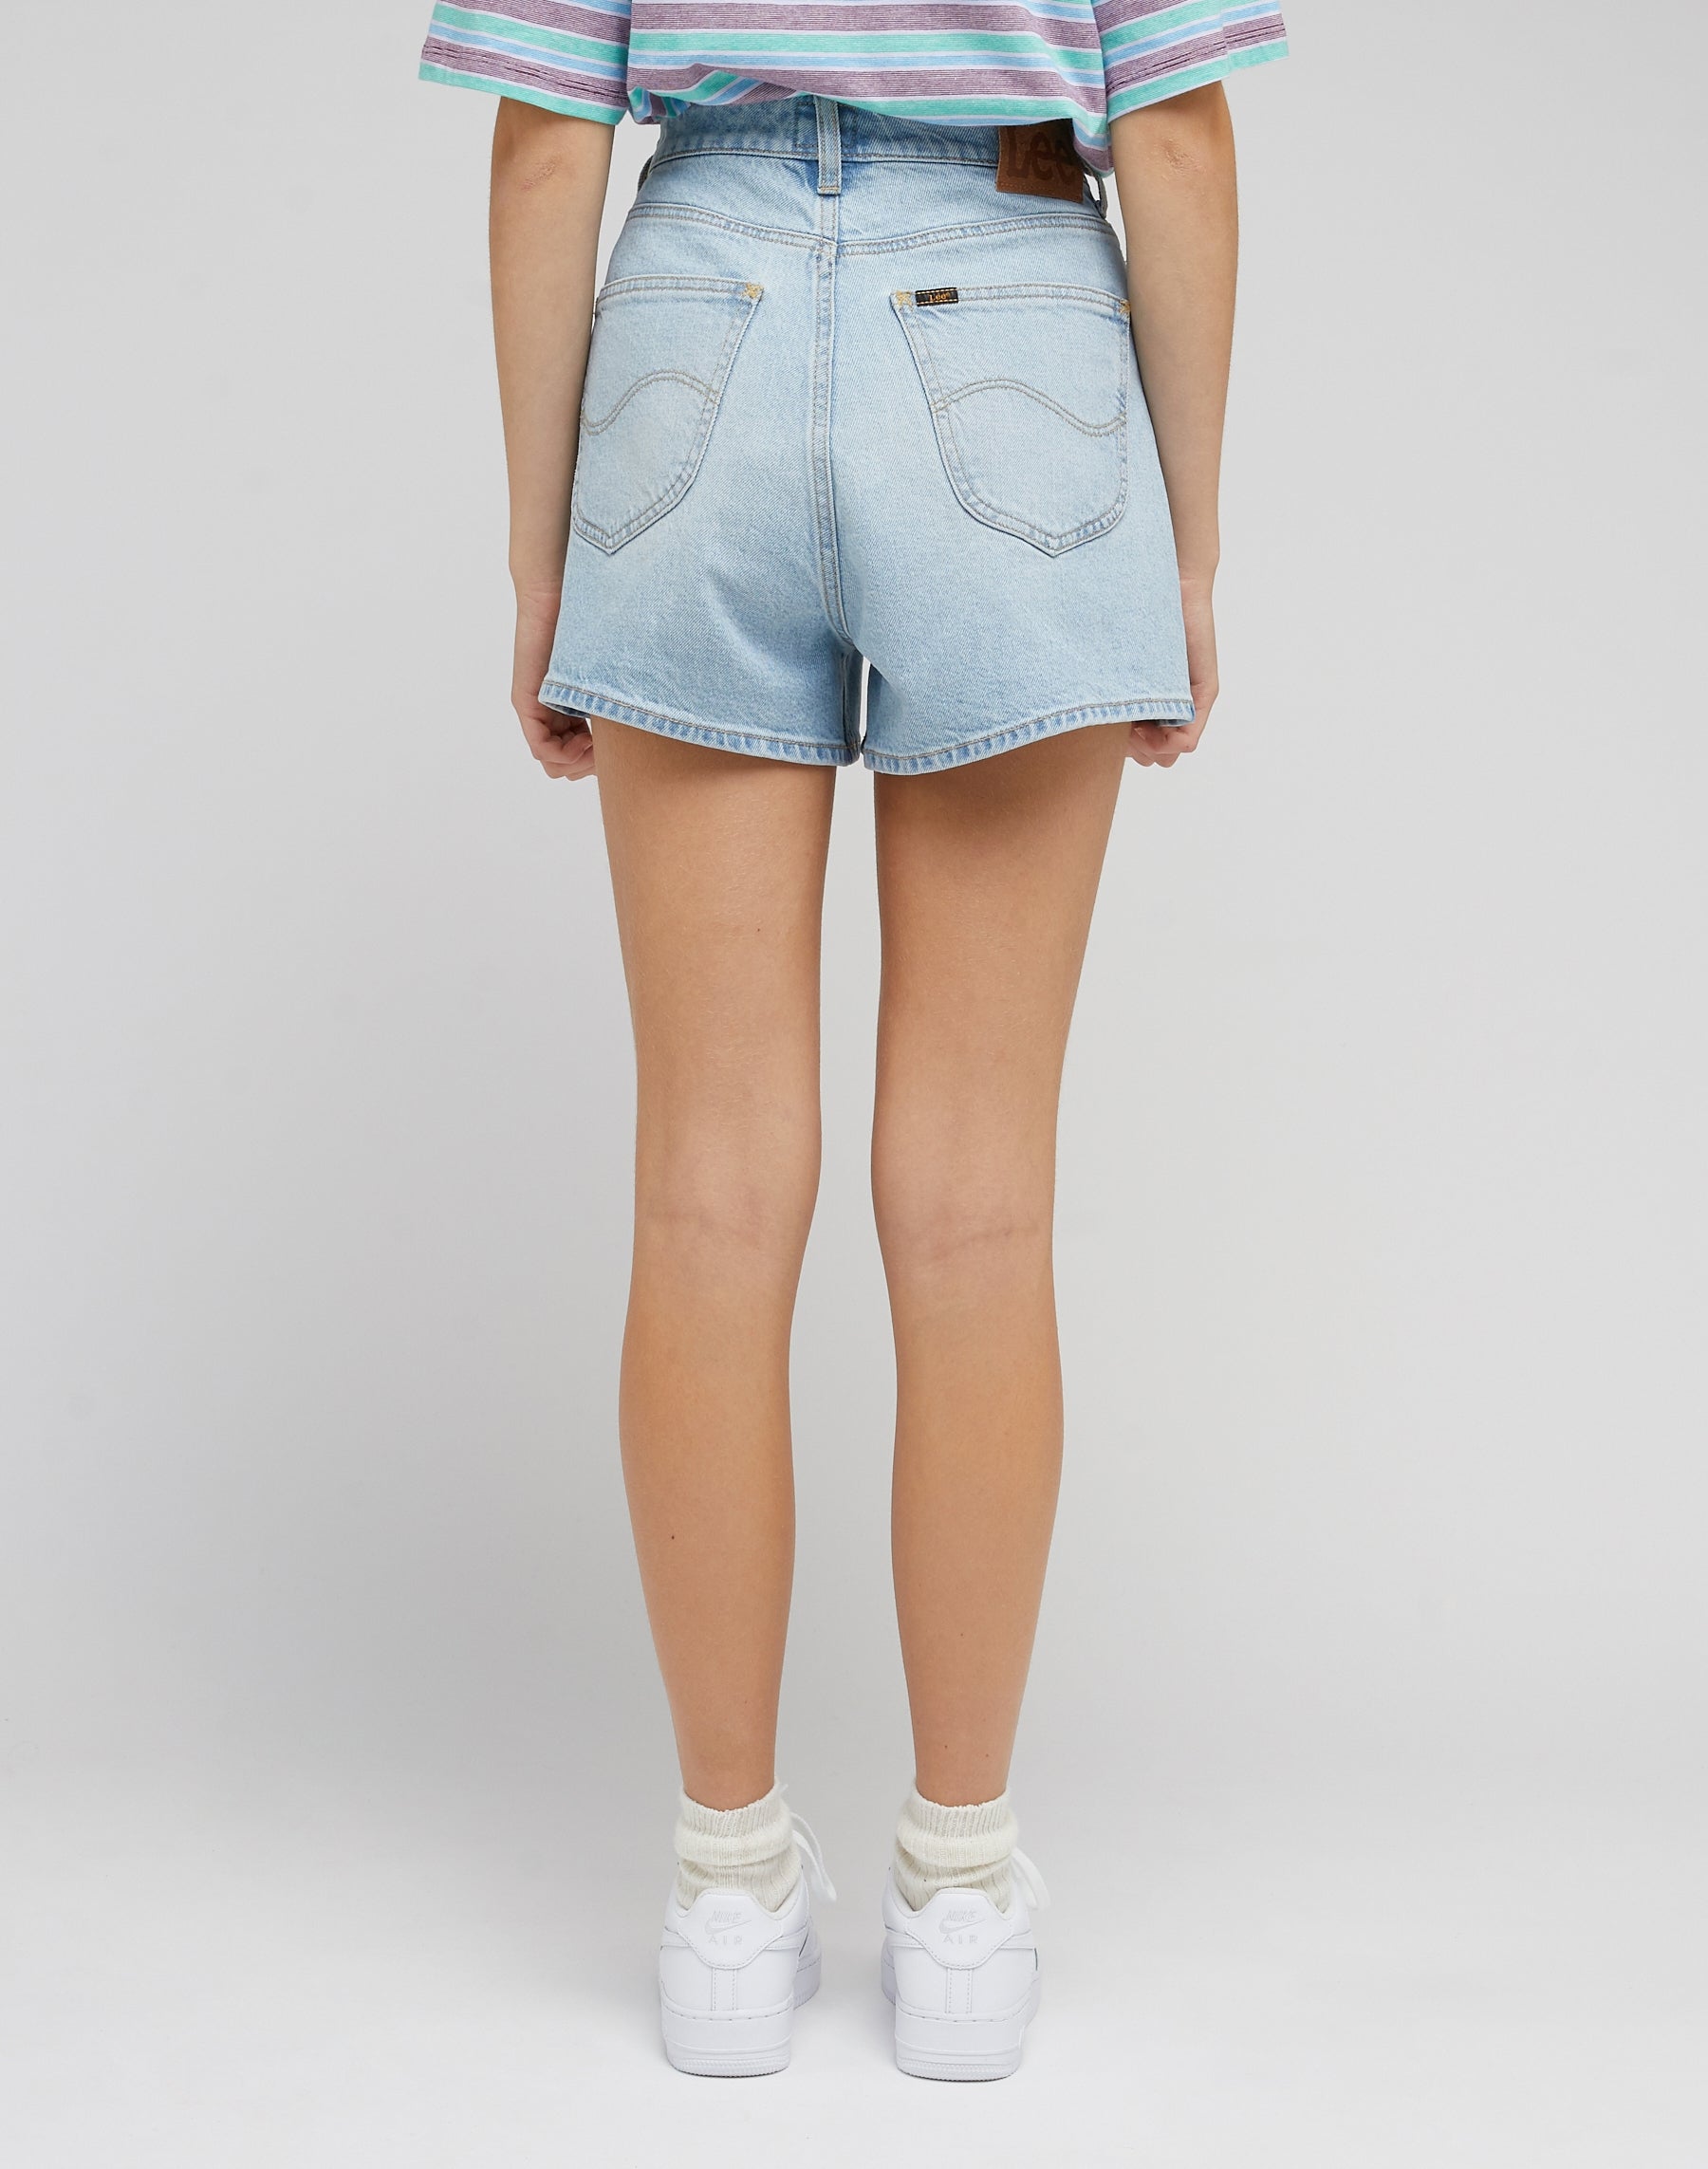 Carol Short in Soft Diffused Jeansshorts Lee   